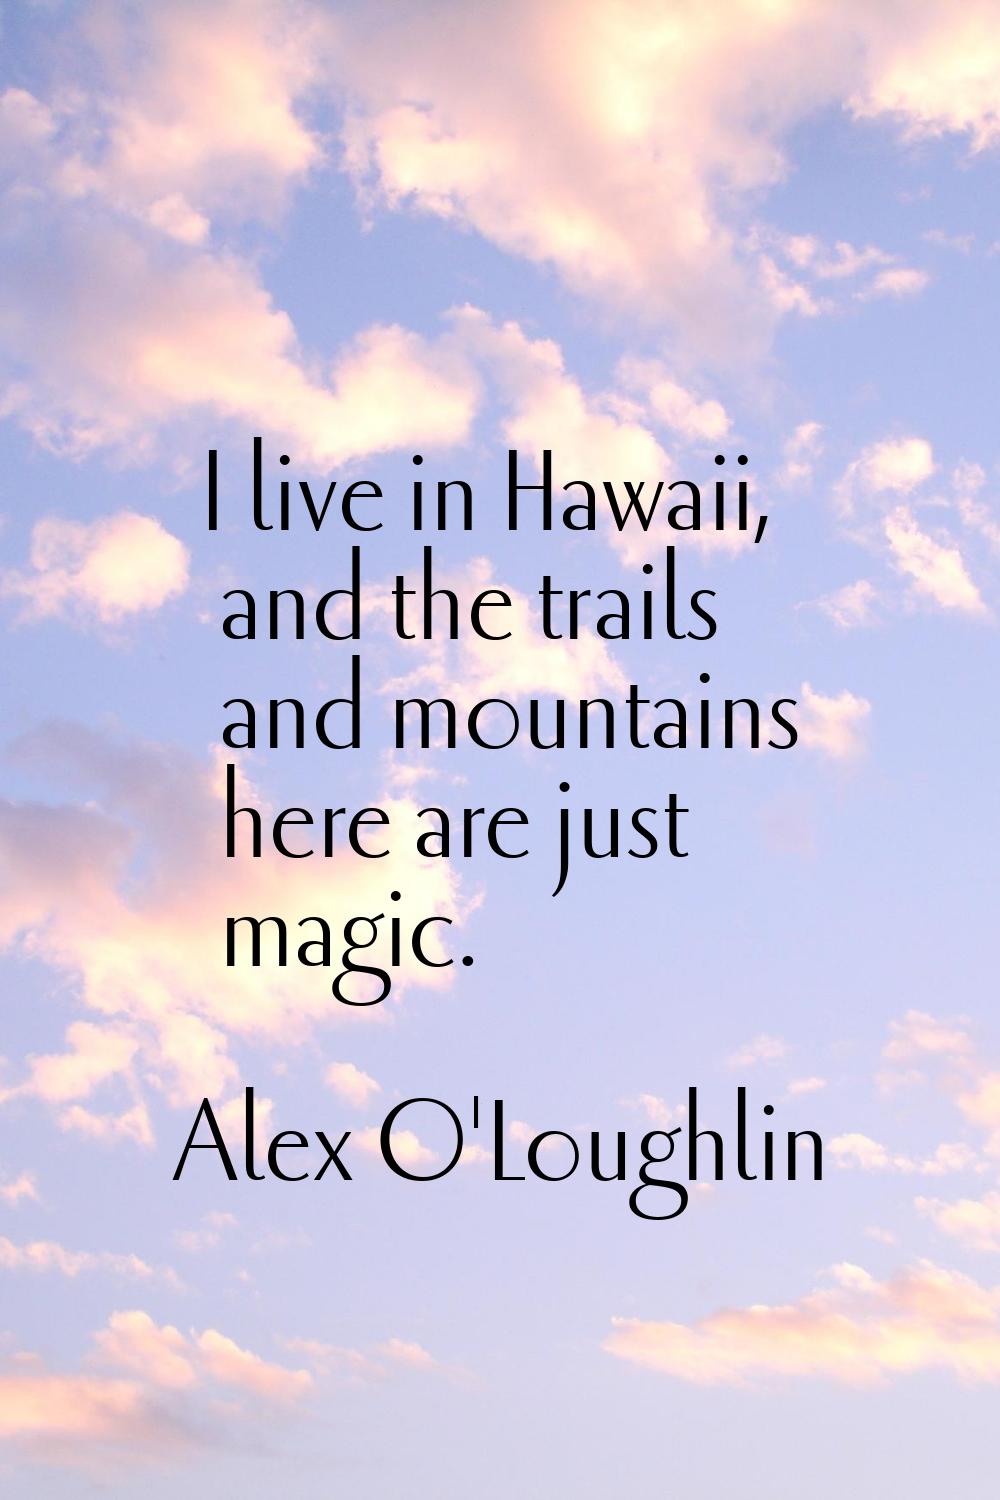 I live in Hawaii, and the trails and mountains here are just magic.